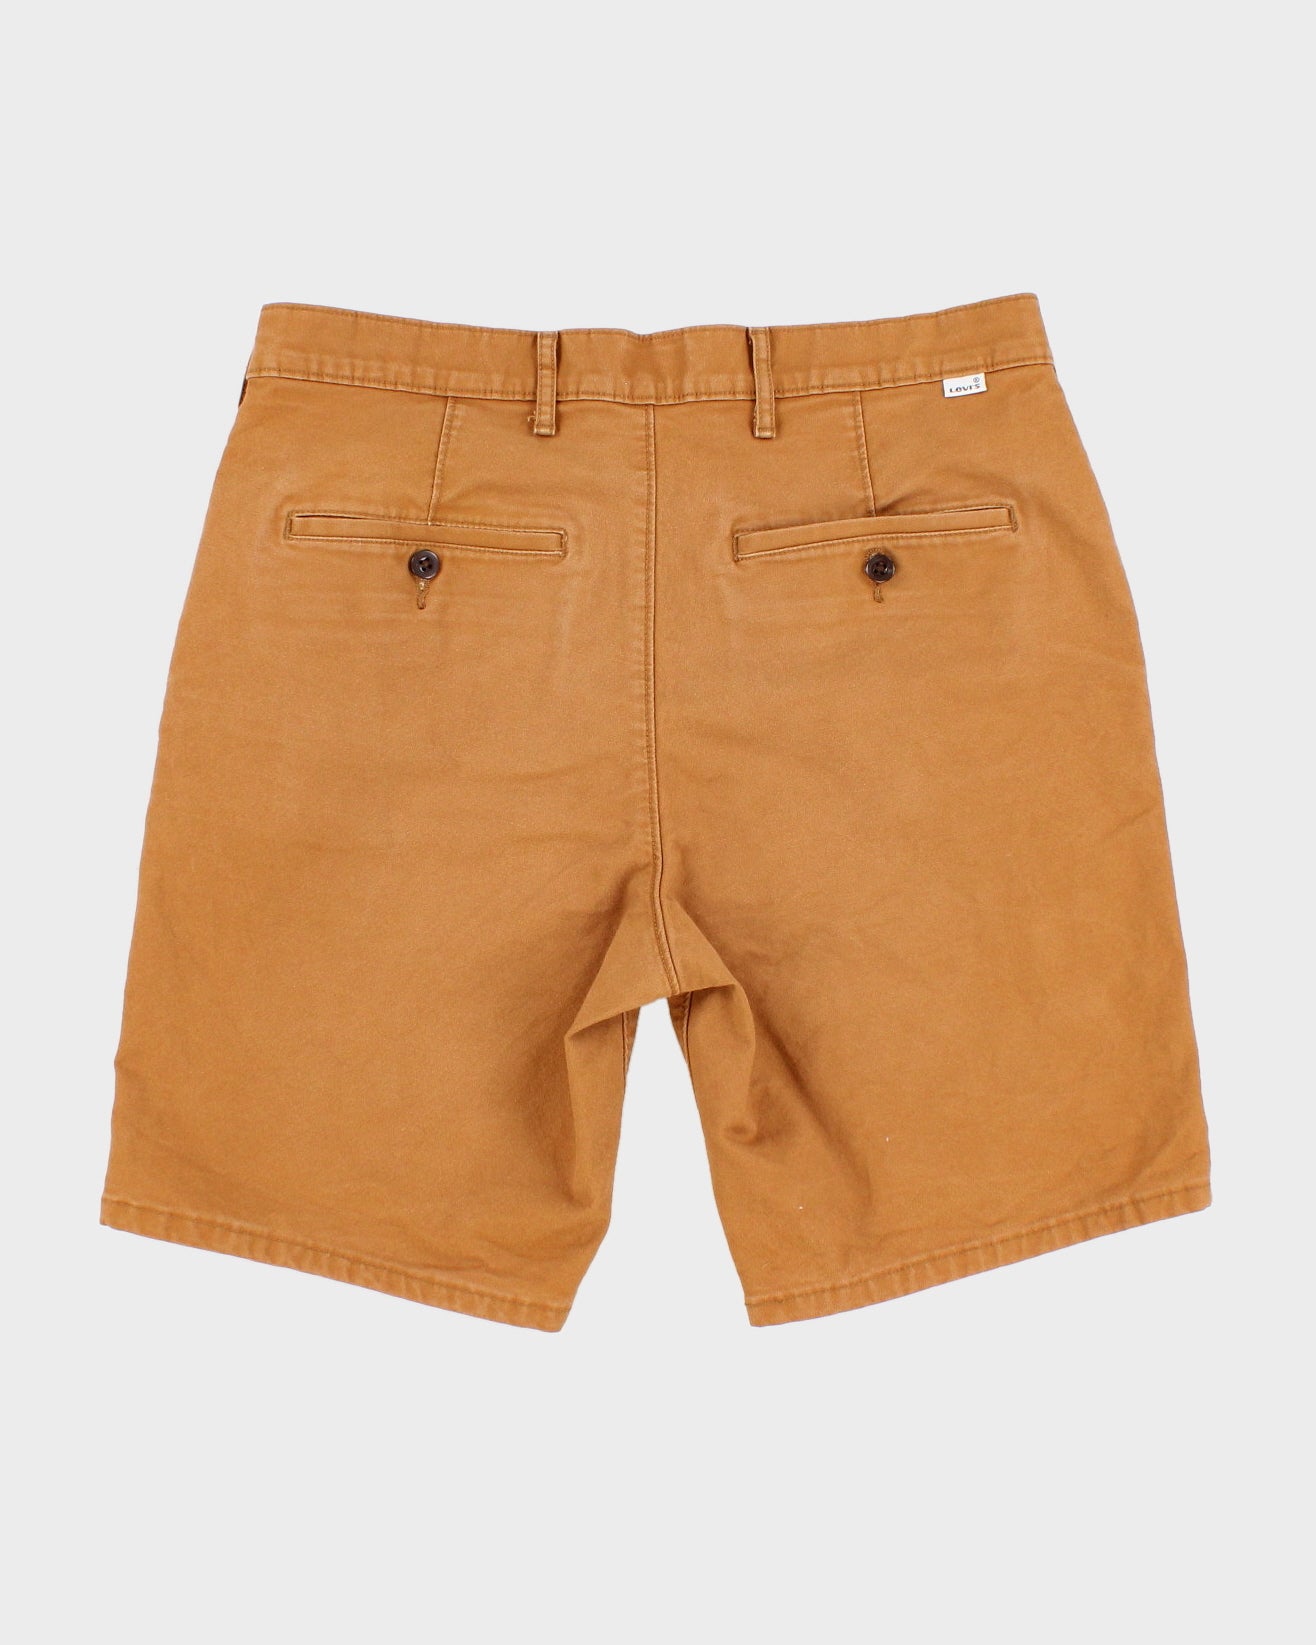 Brown Chino Levi's Shorts - S